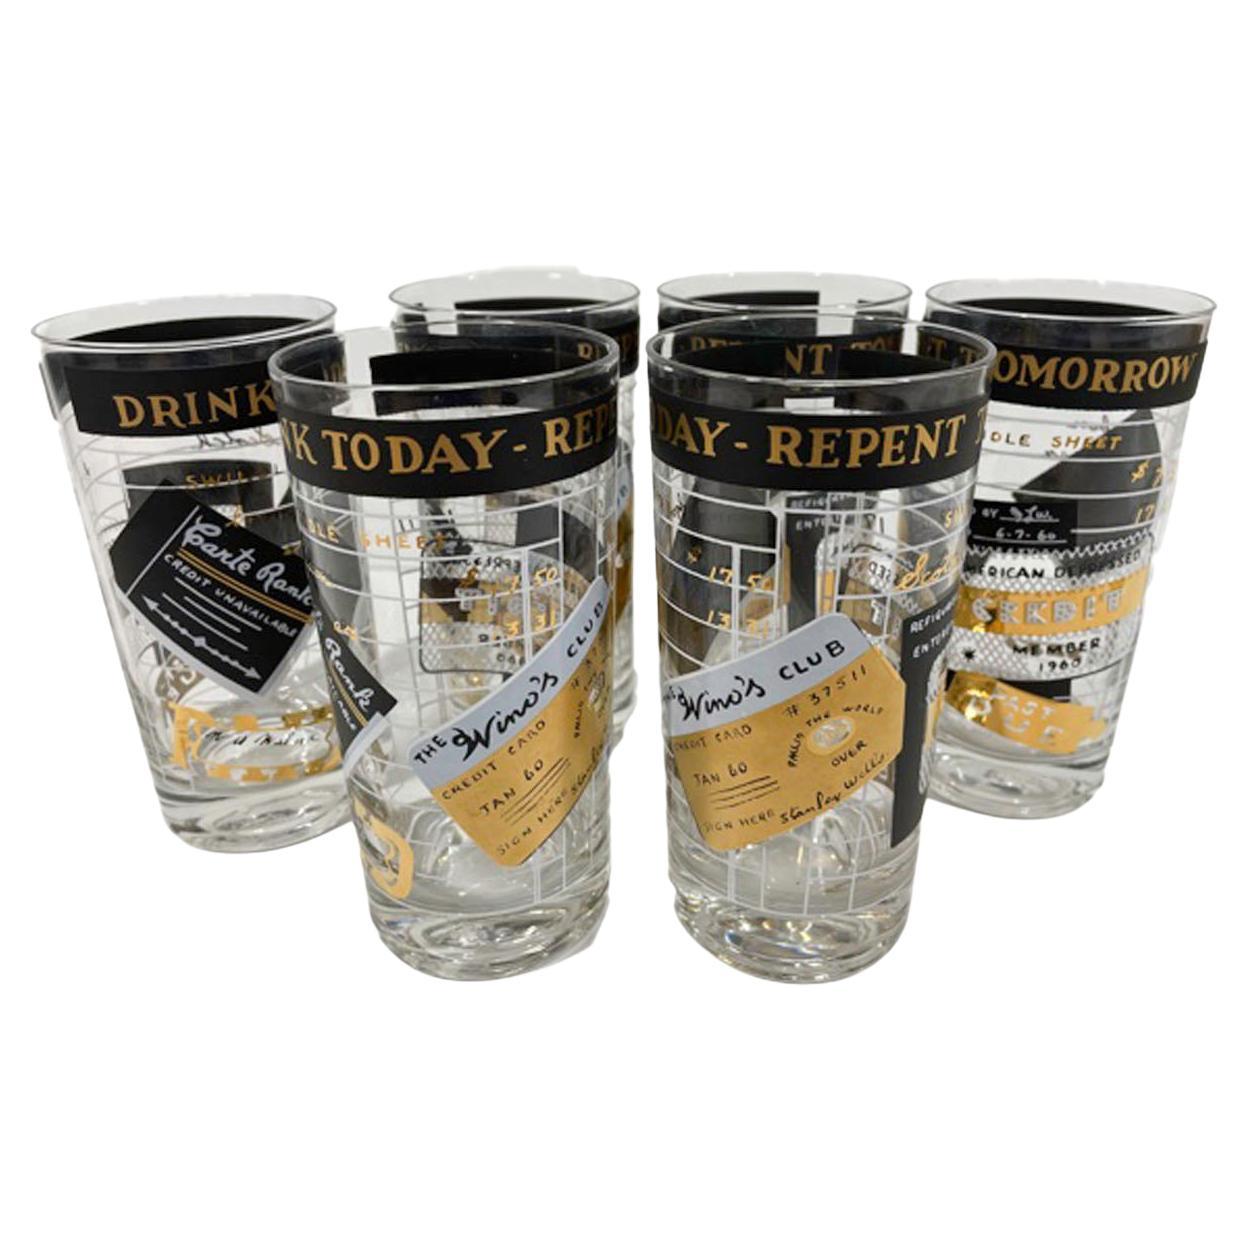 Set of 6 Credit Card Themed Highball Glasses, "Drink Today, Repent Tomorrow"